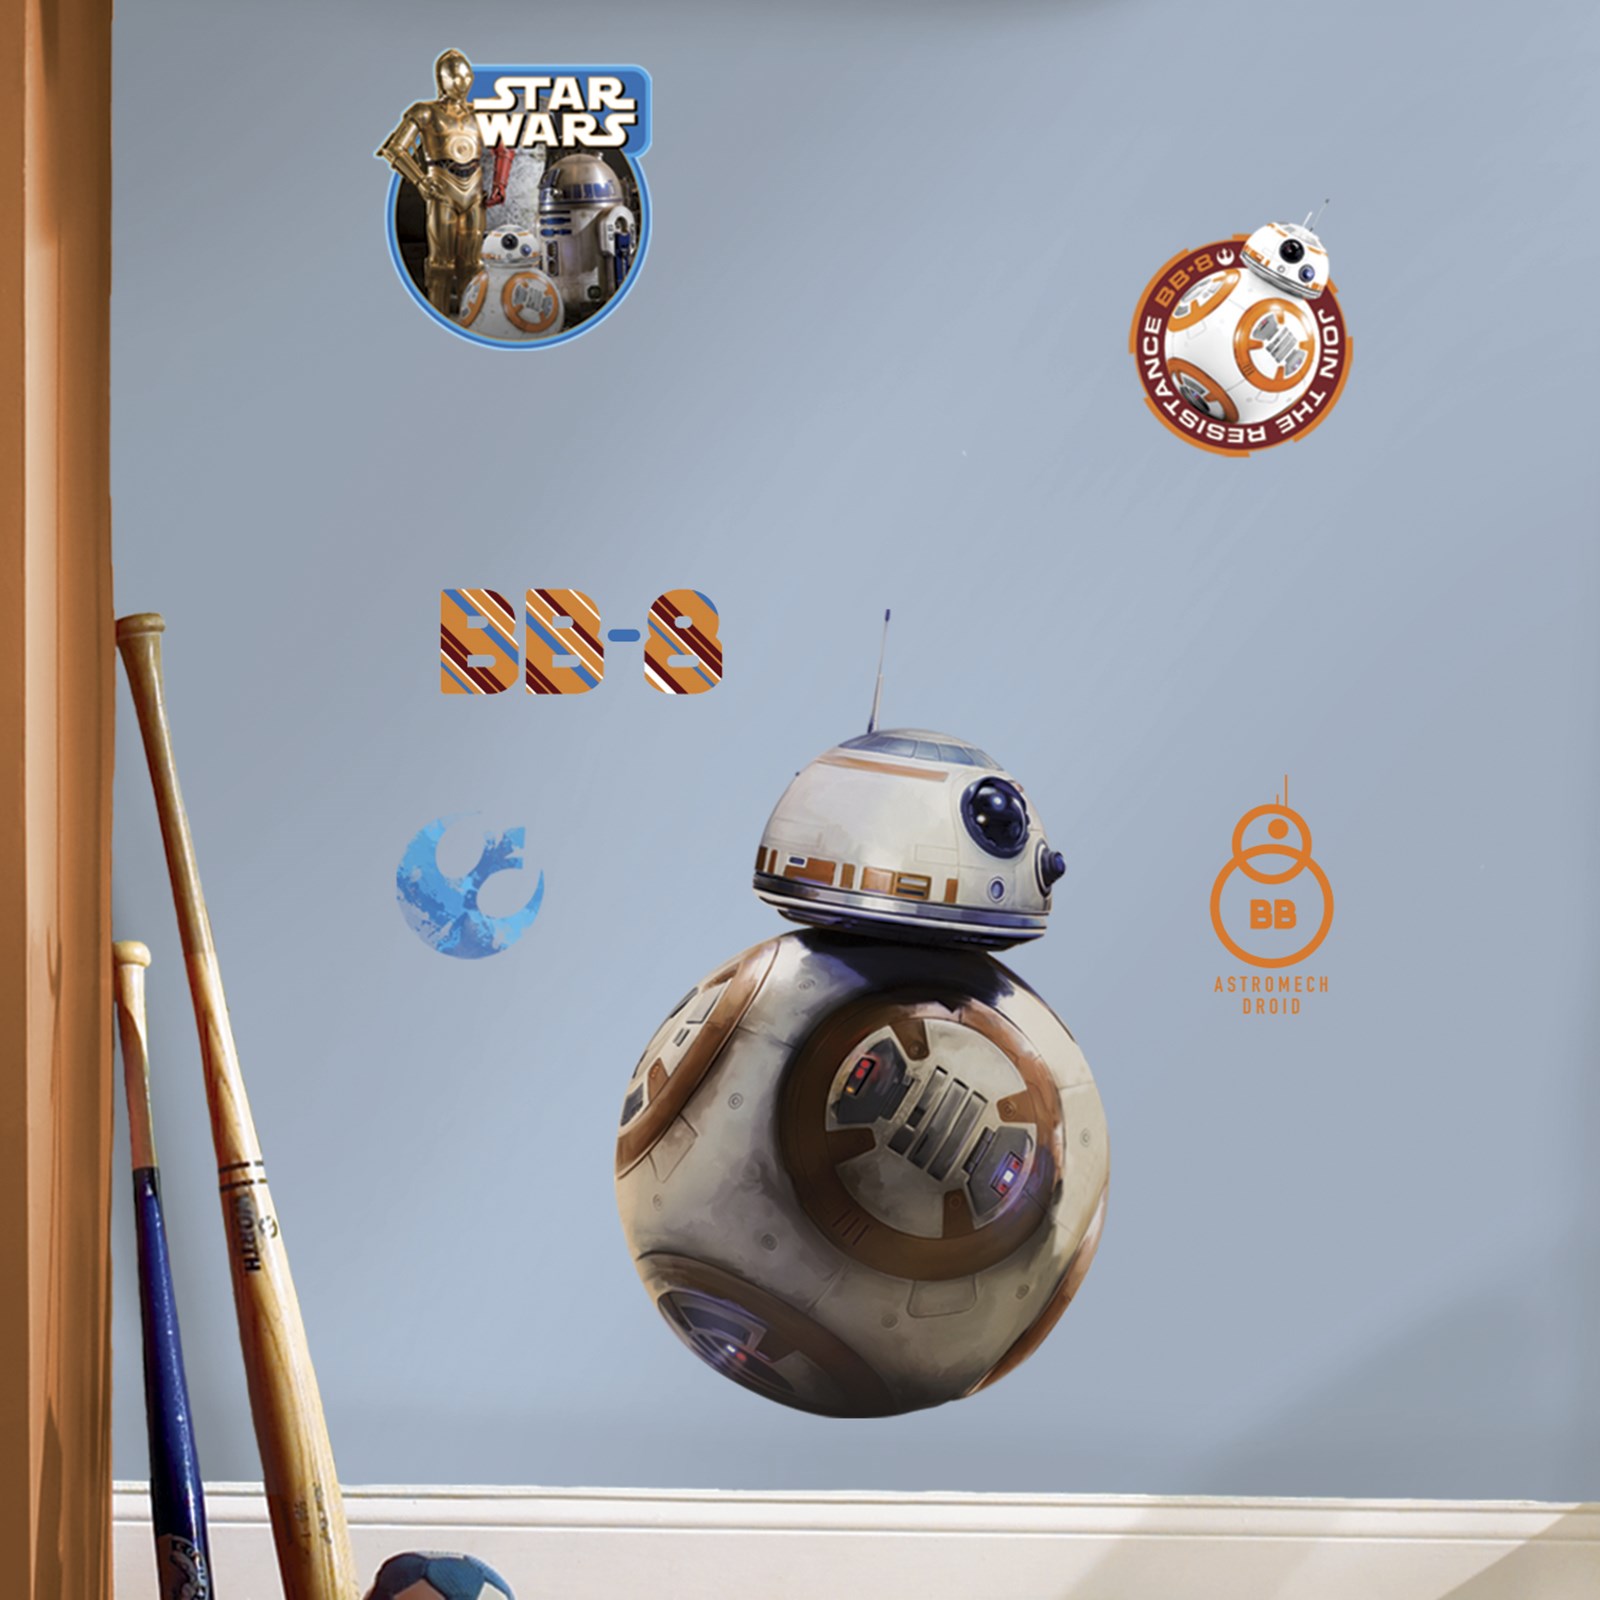 Star Wars 7 BB-8 Giant Wall Decal